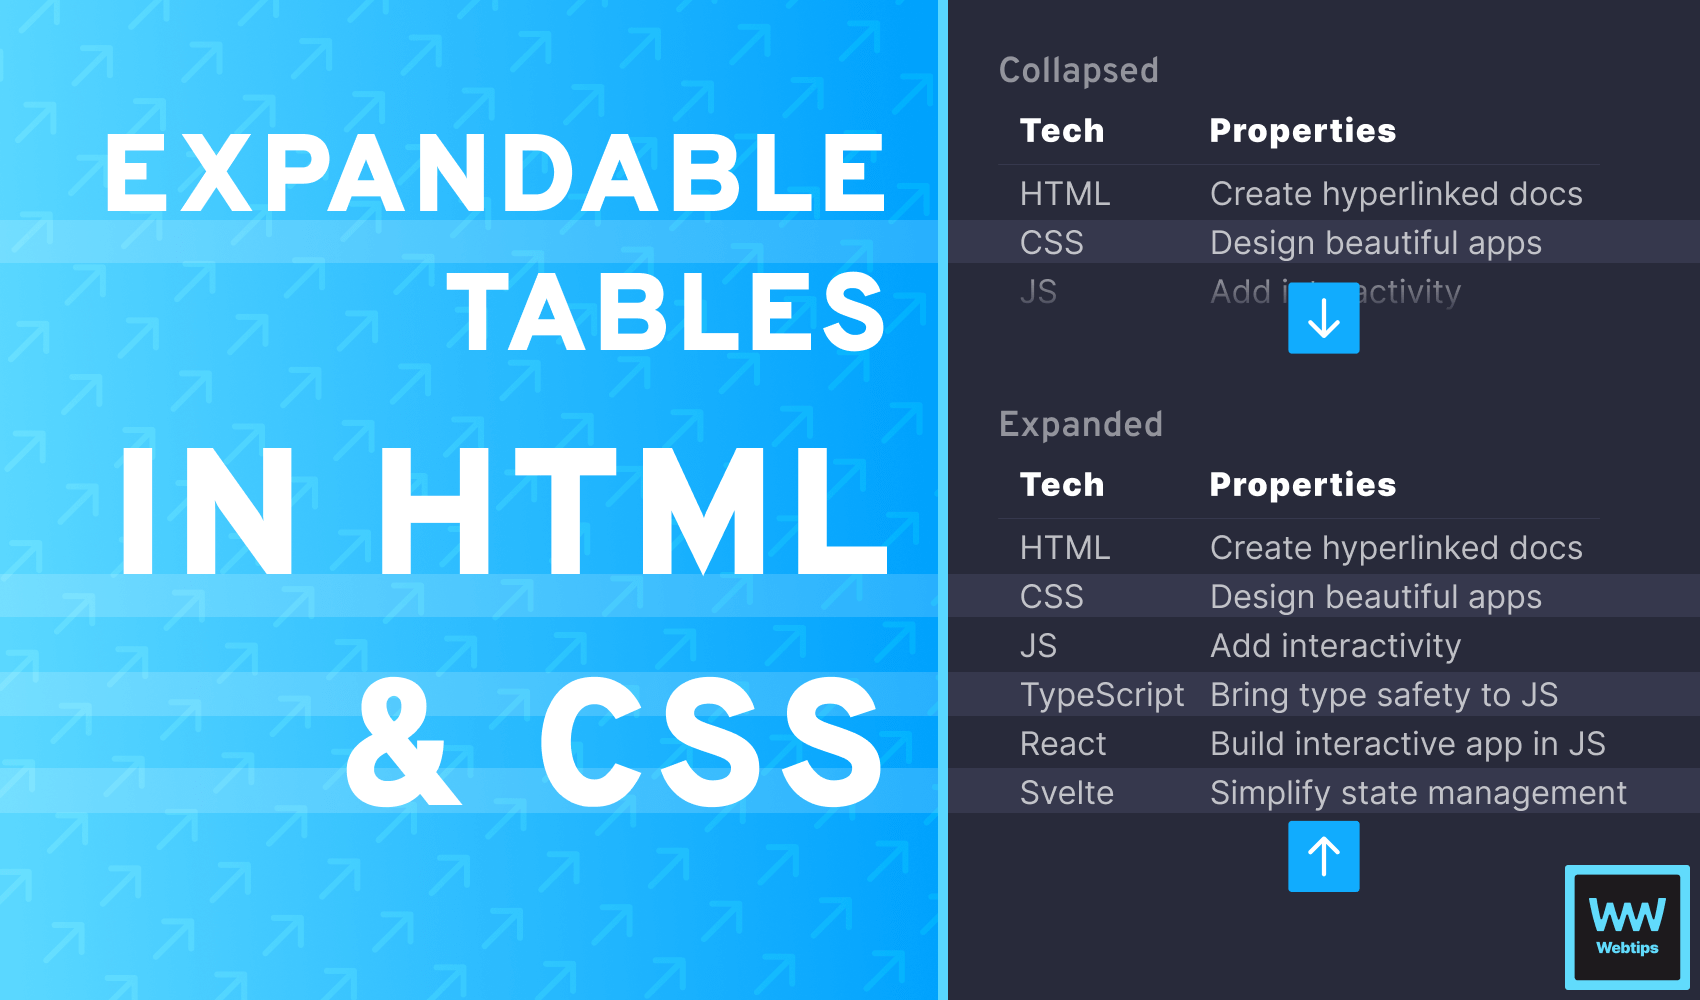 How to Expand and Collapse Tables in HTML